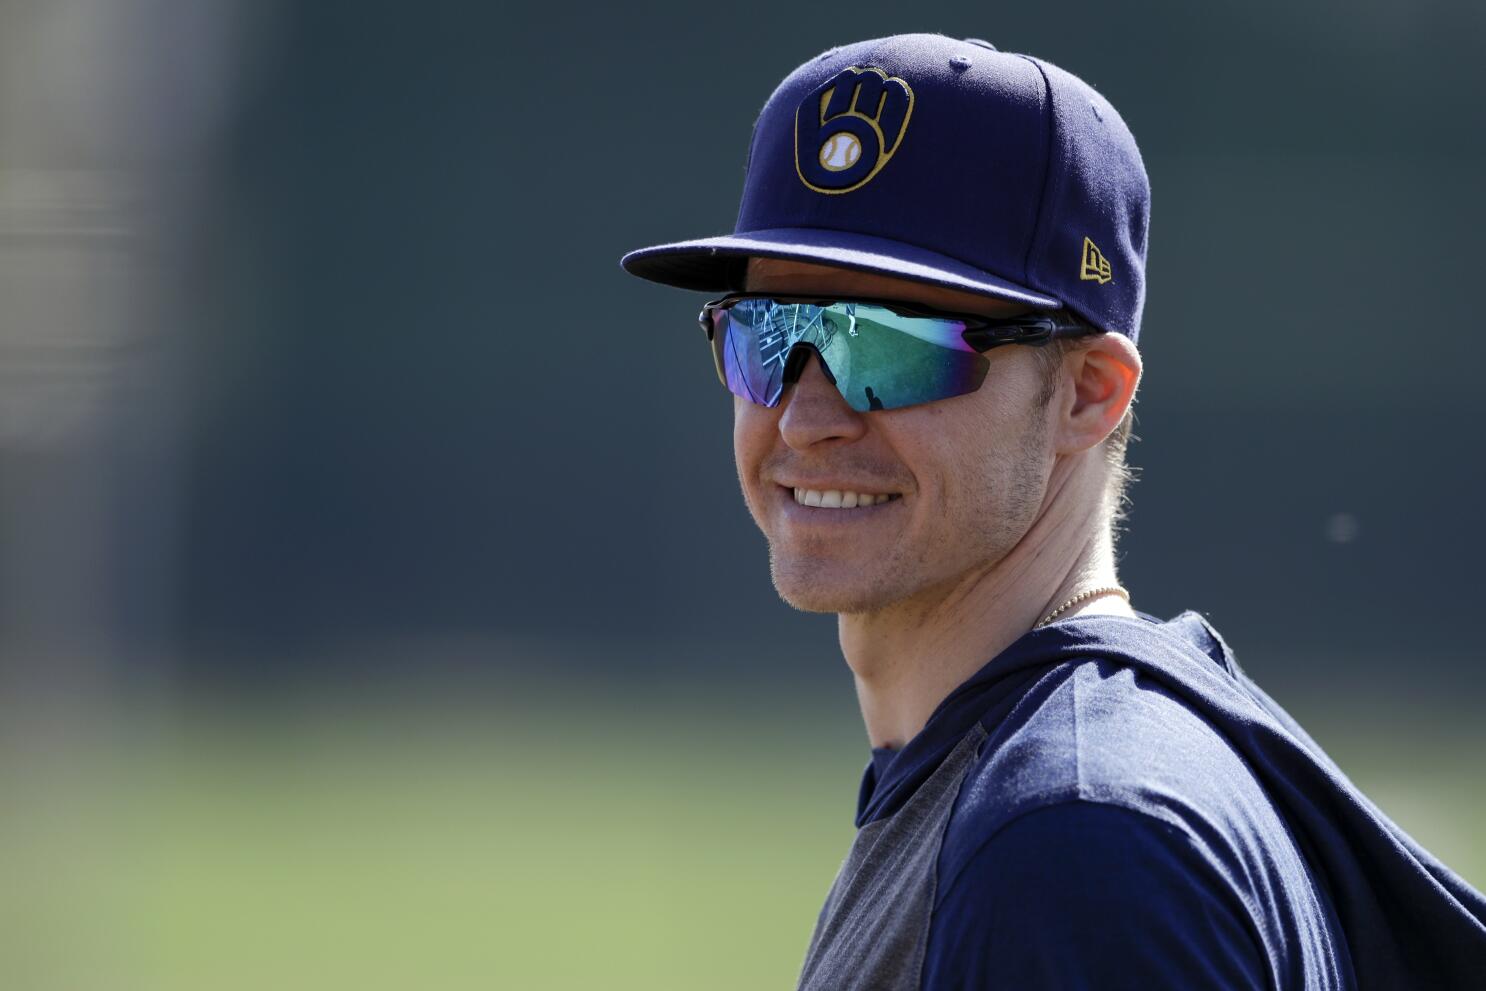 Brock Holt, Milwaukee Brewers finalize 1-year contract - The San